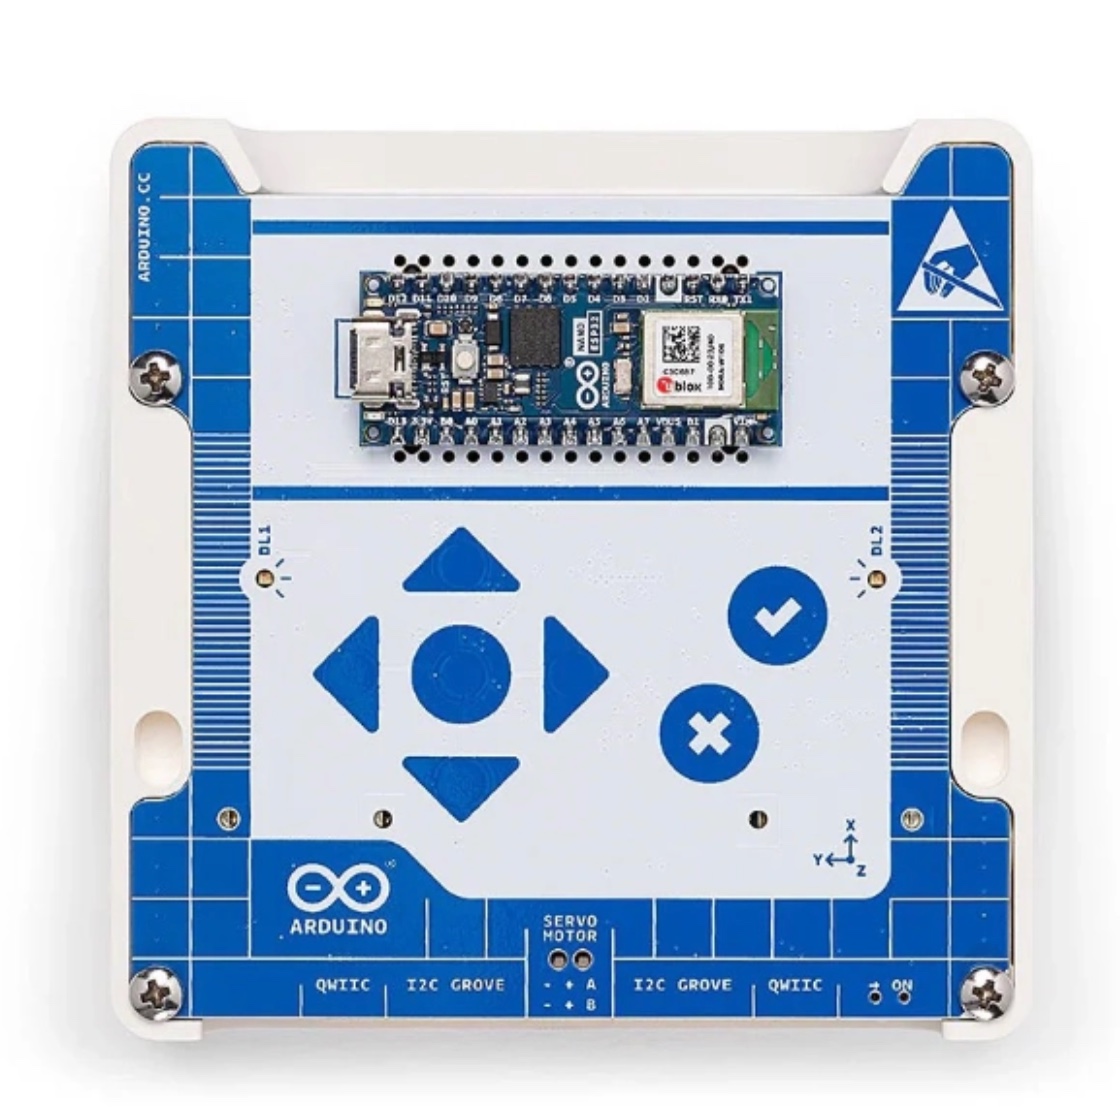 Introducing Arduino ALVIk, the ultimate STEM education tool. With support for multiple programming languages, modular design, and wireless connectivity, it's perfect for classroom and remote learning. elektormagazine.com/news/arduino-a… #arduino #stem #programming